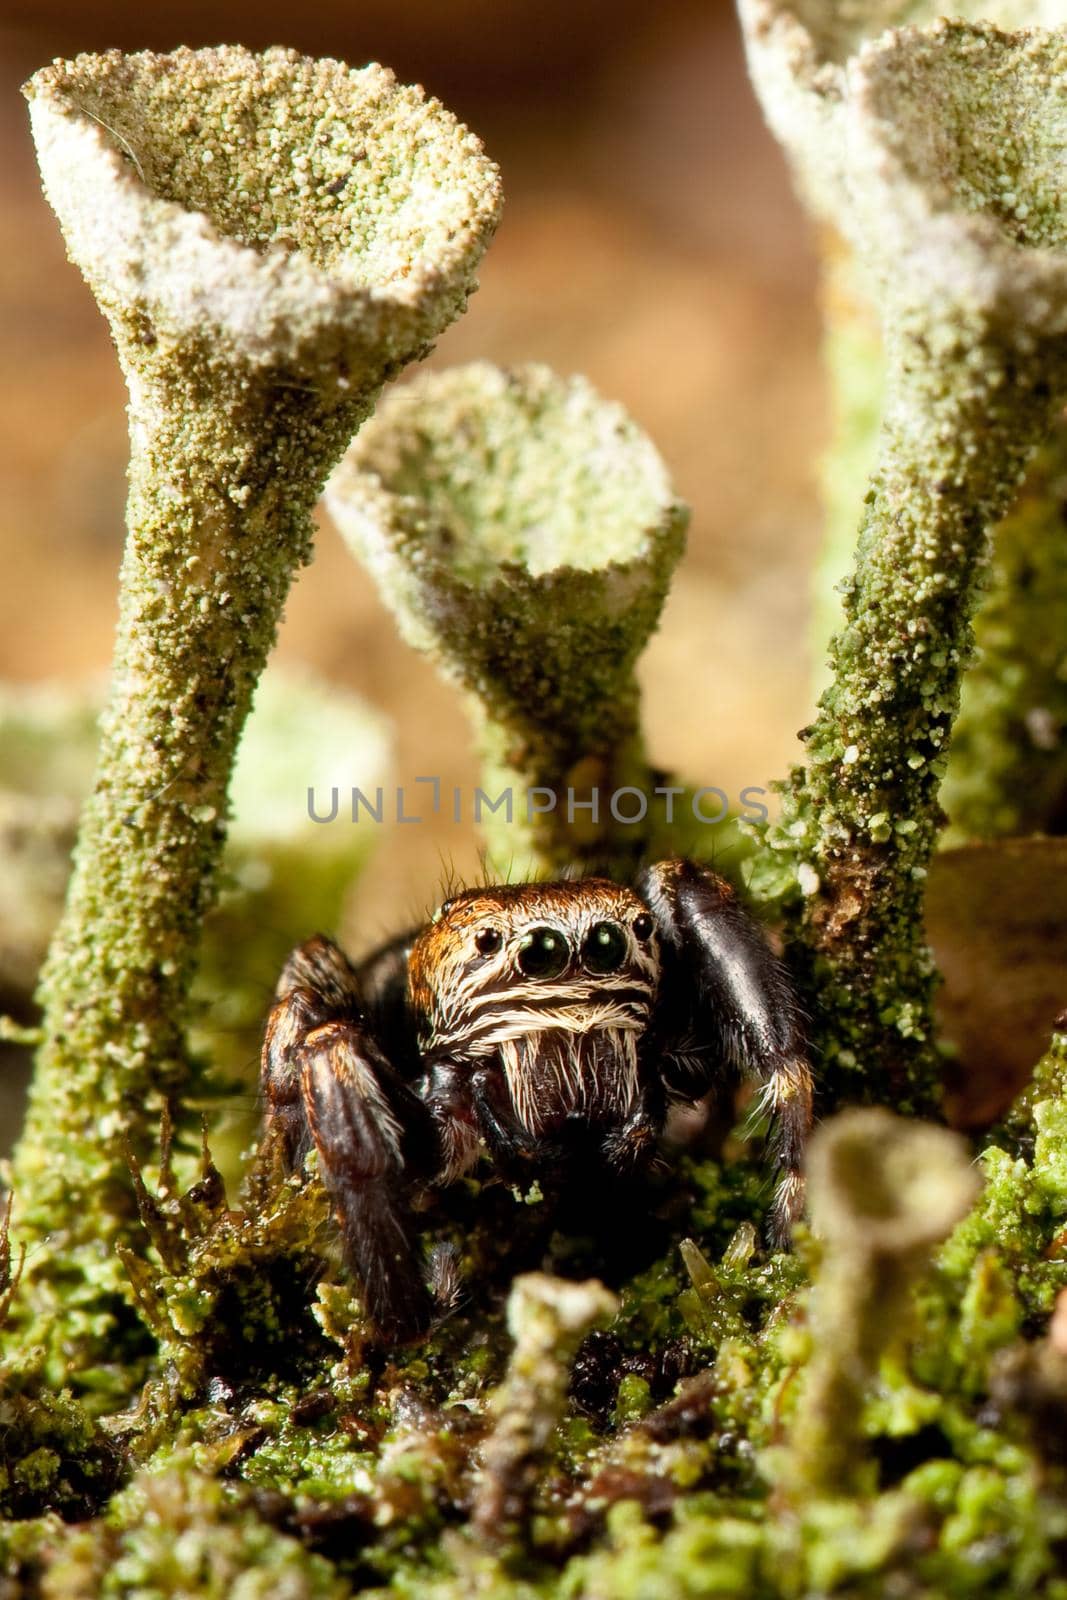 Jumping spider hiding in a green lichens